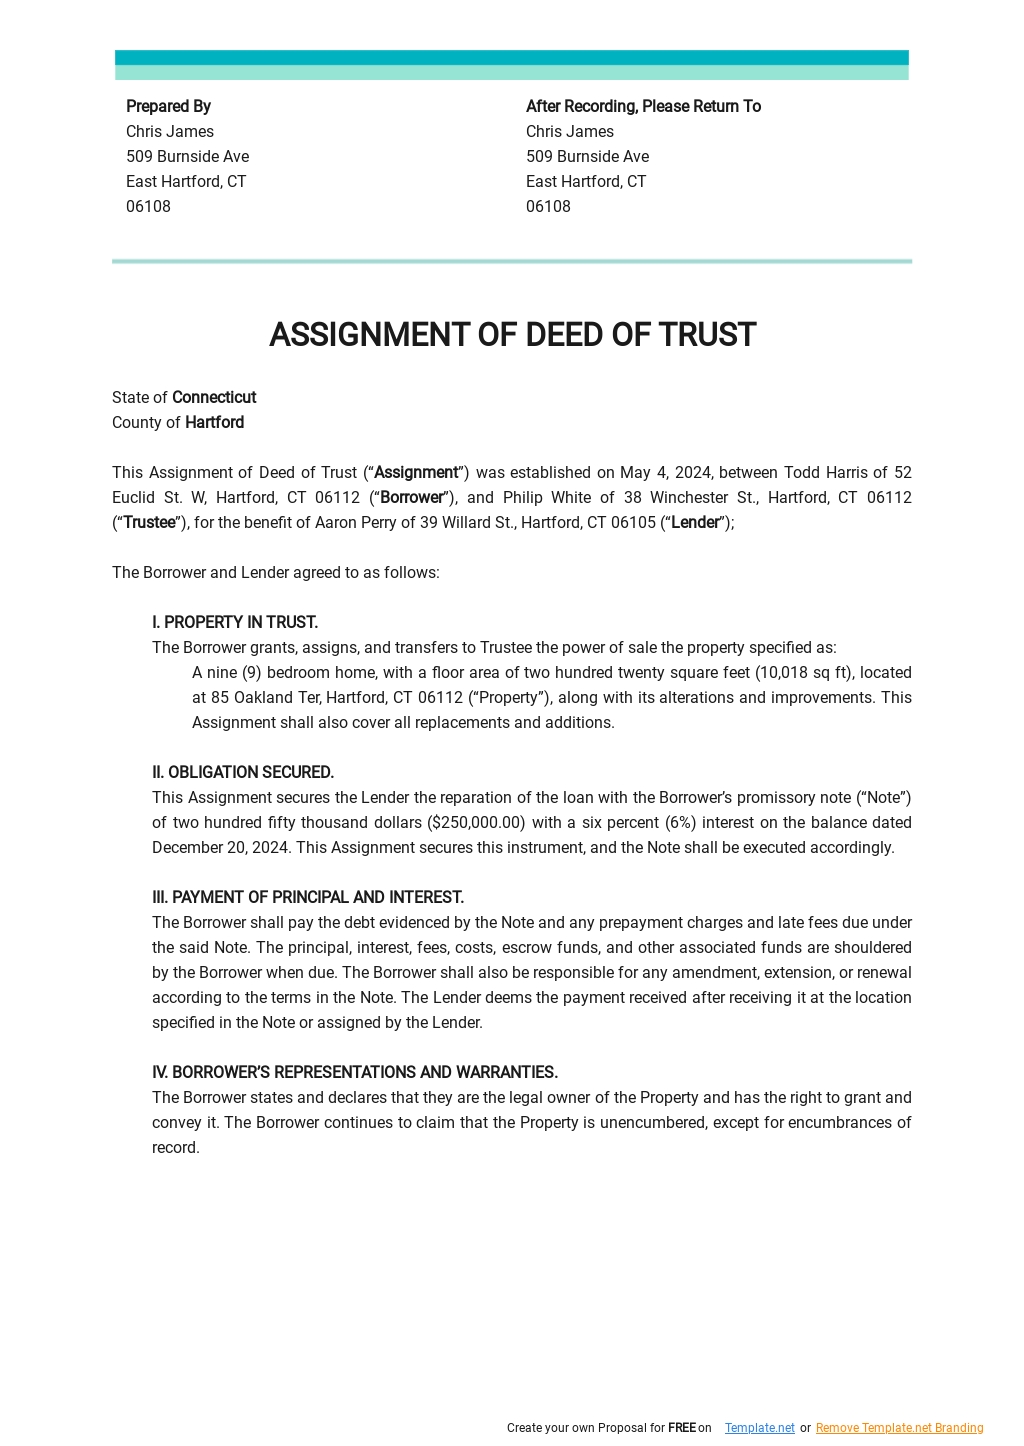 Assignment of Deed of Trust Template